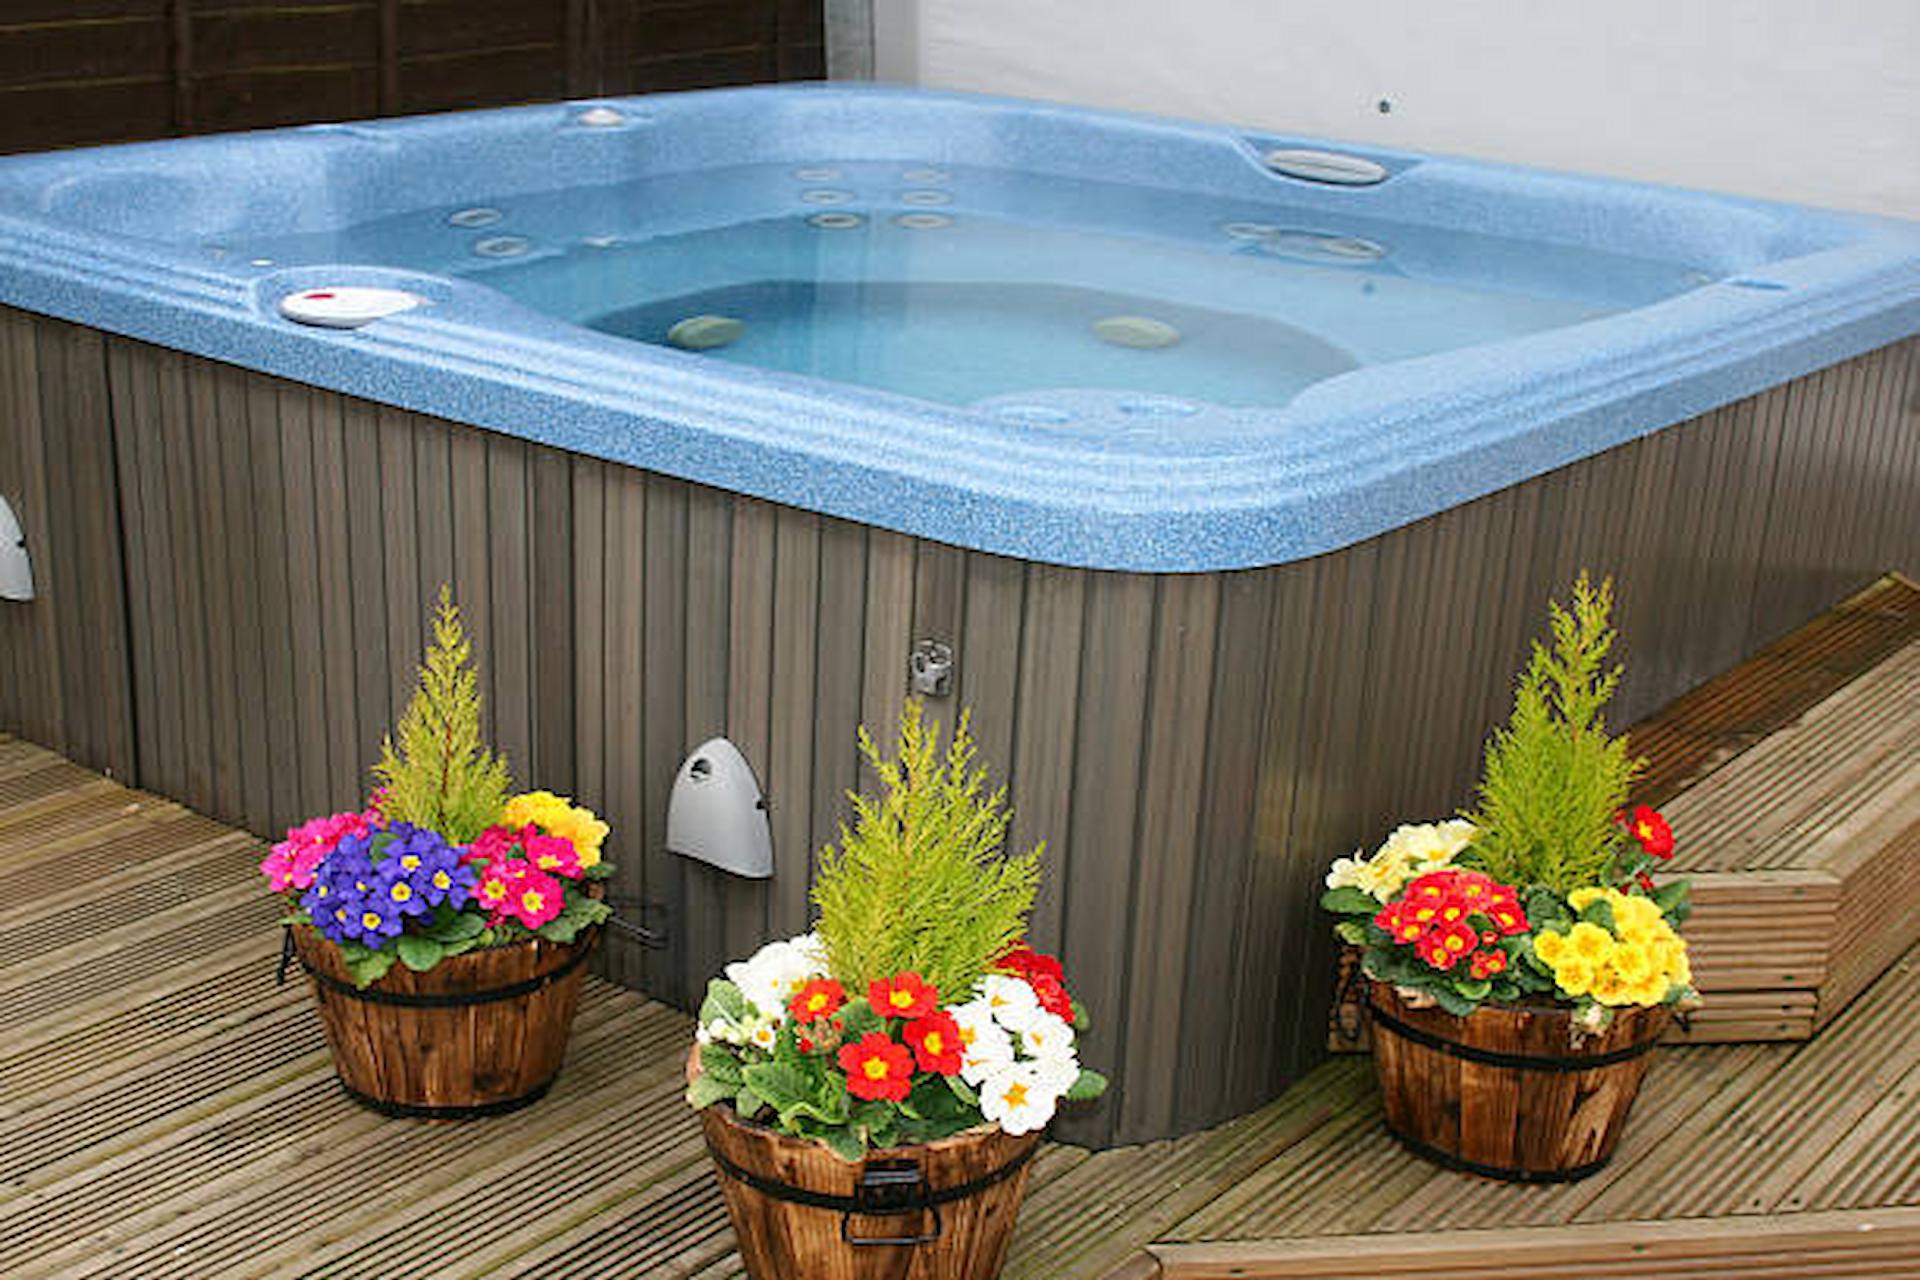 What To Consider When Purchasing A Hot Tub